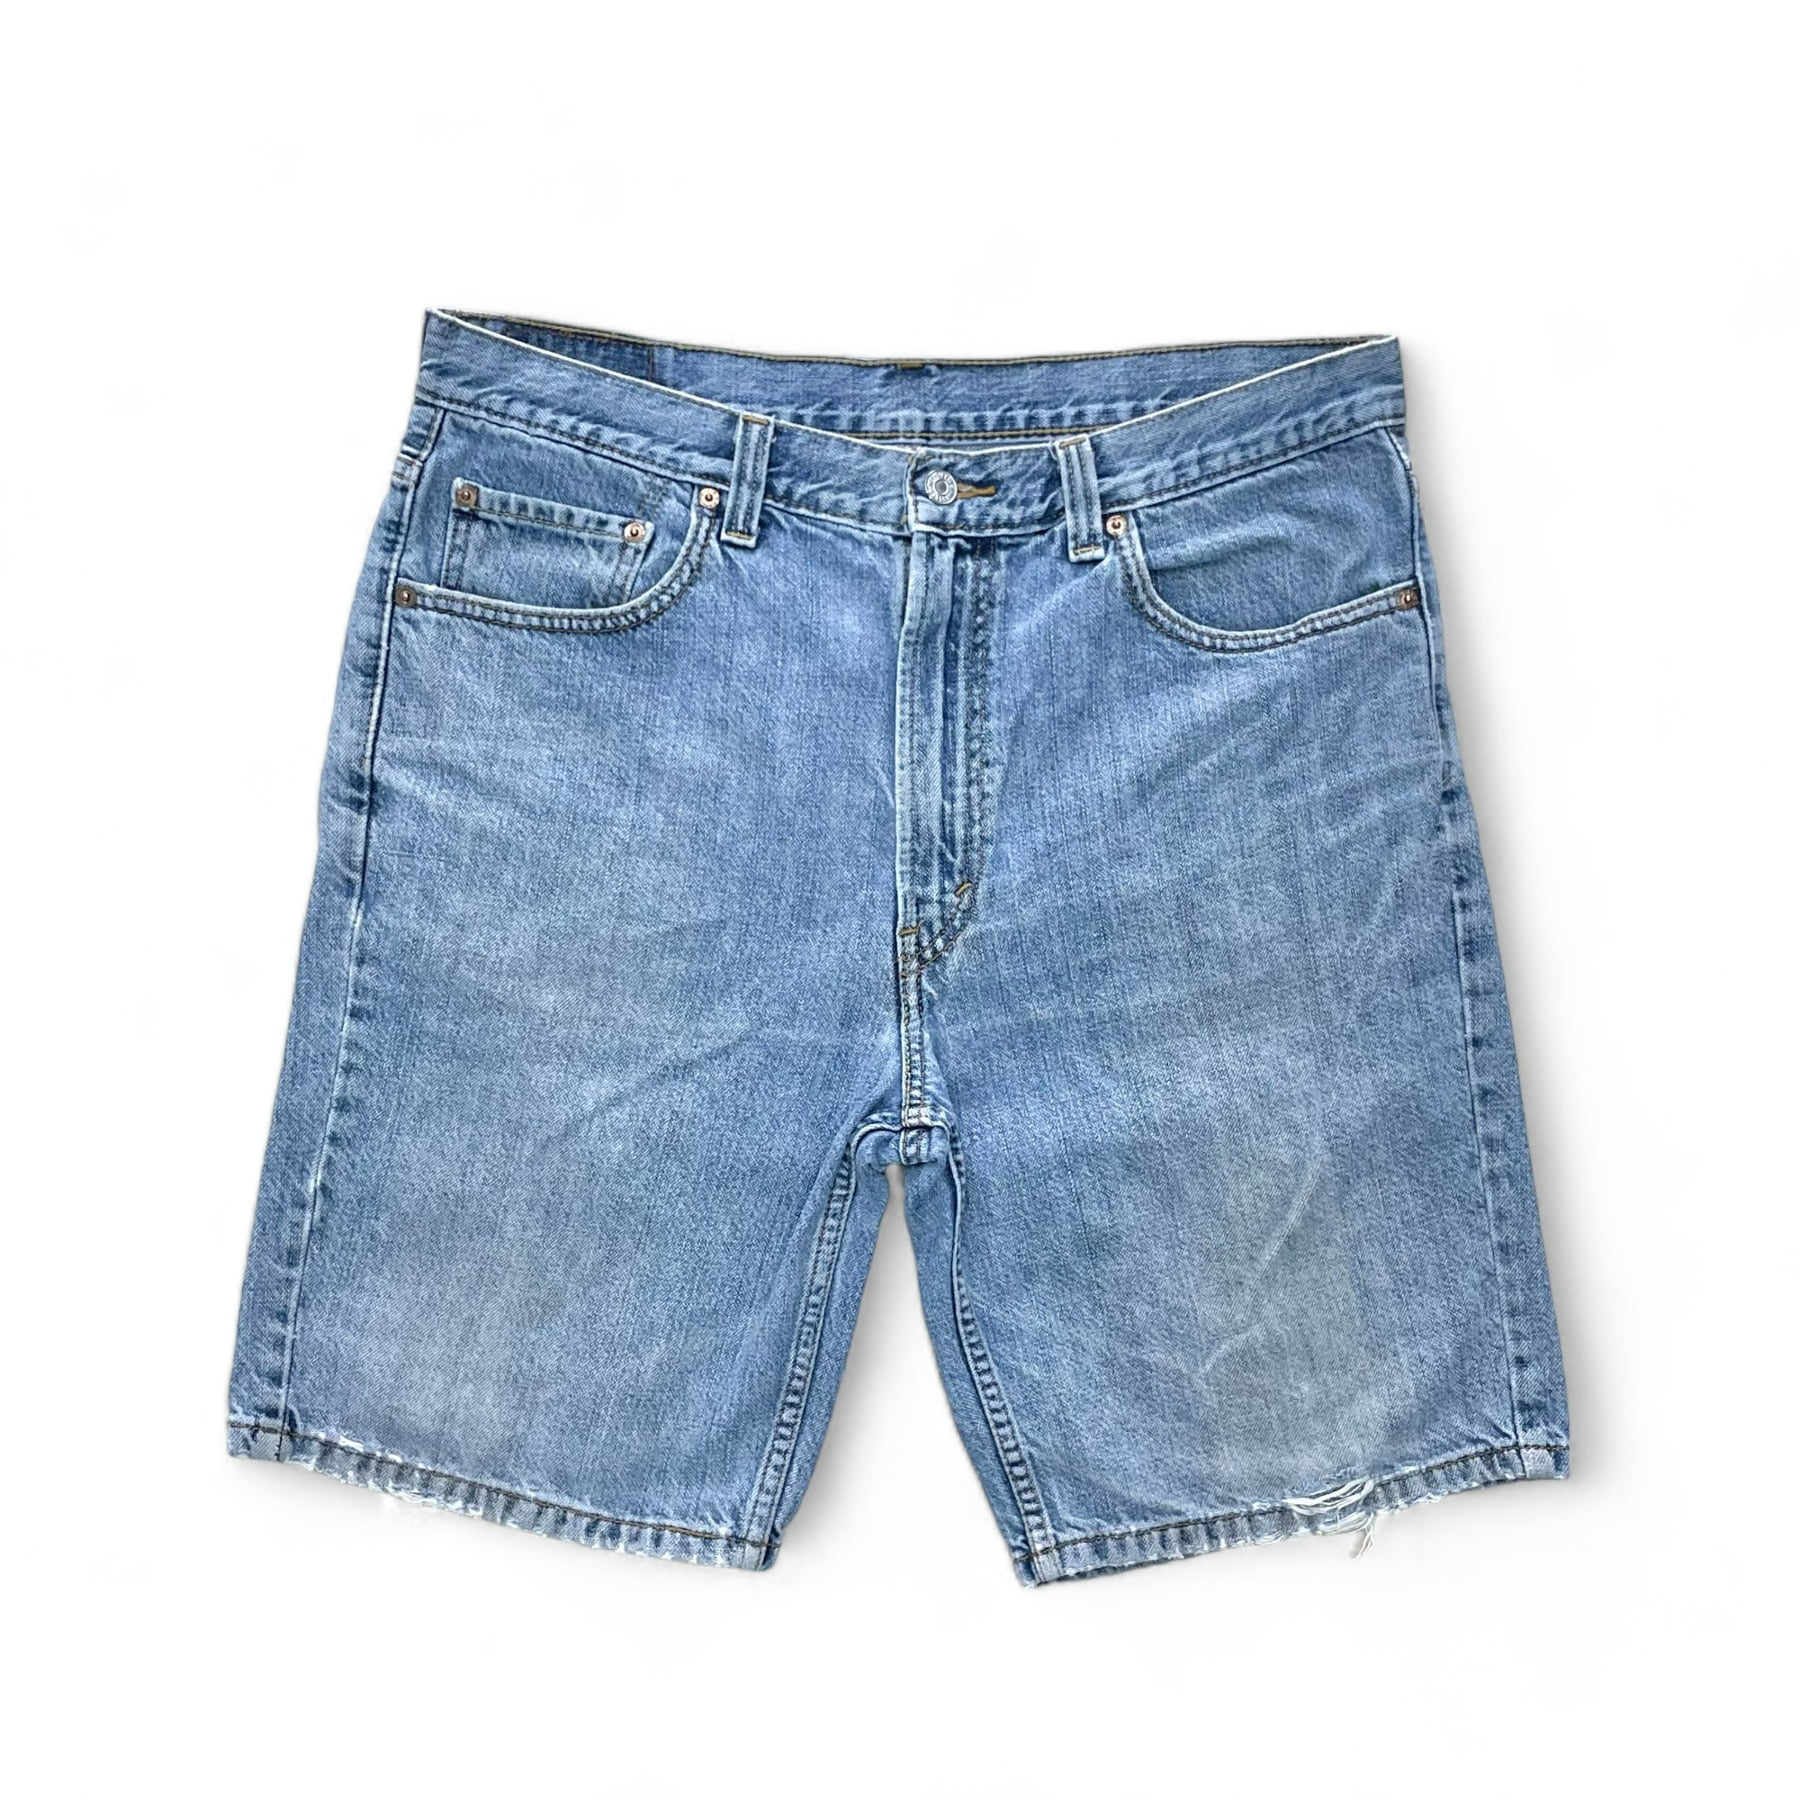 Levis 505 Shorts - 34inch